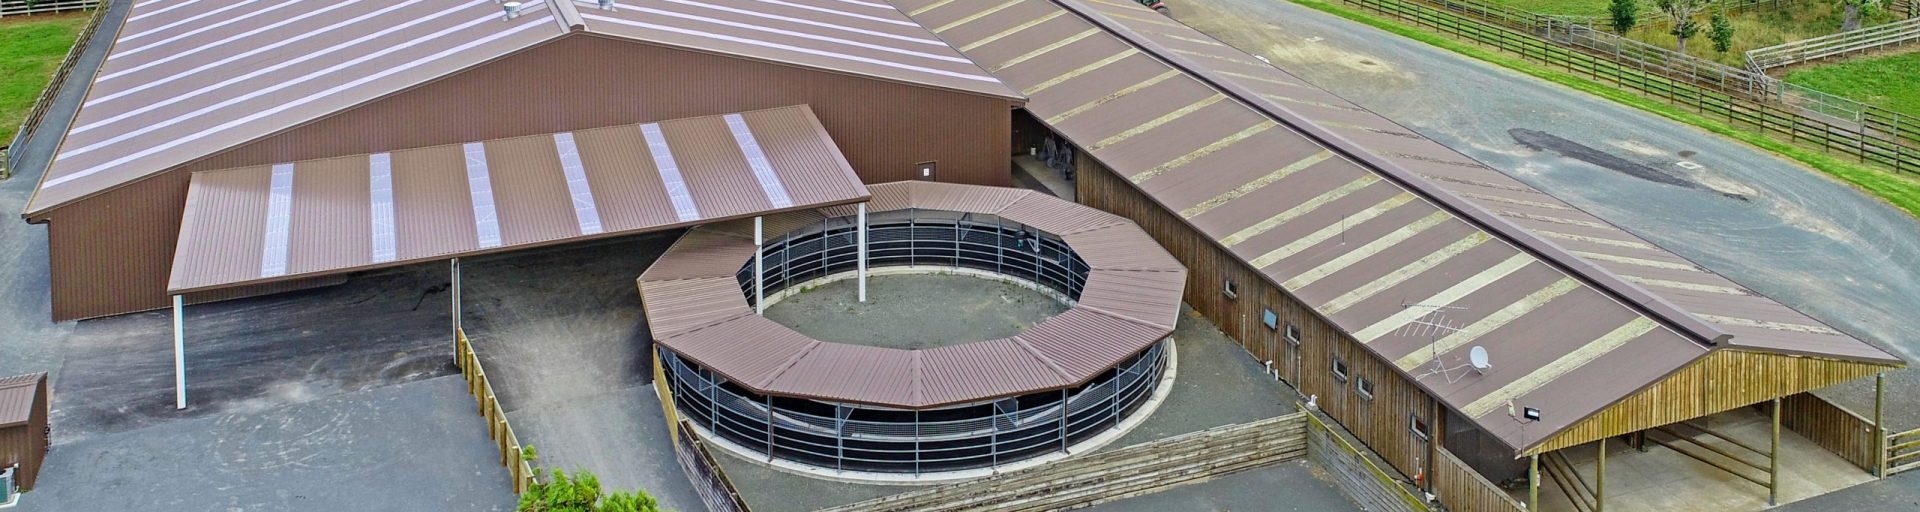 drone photo of ardmore horse stable complex